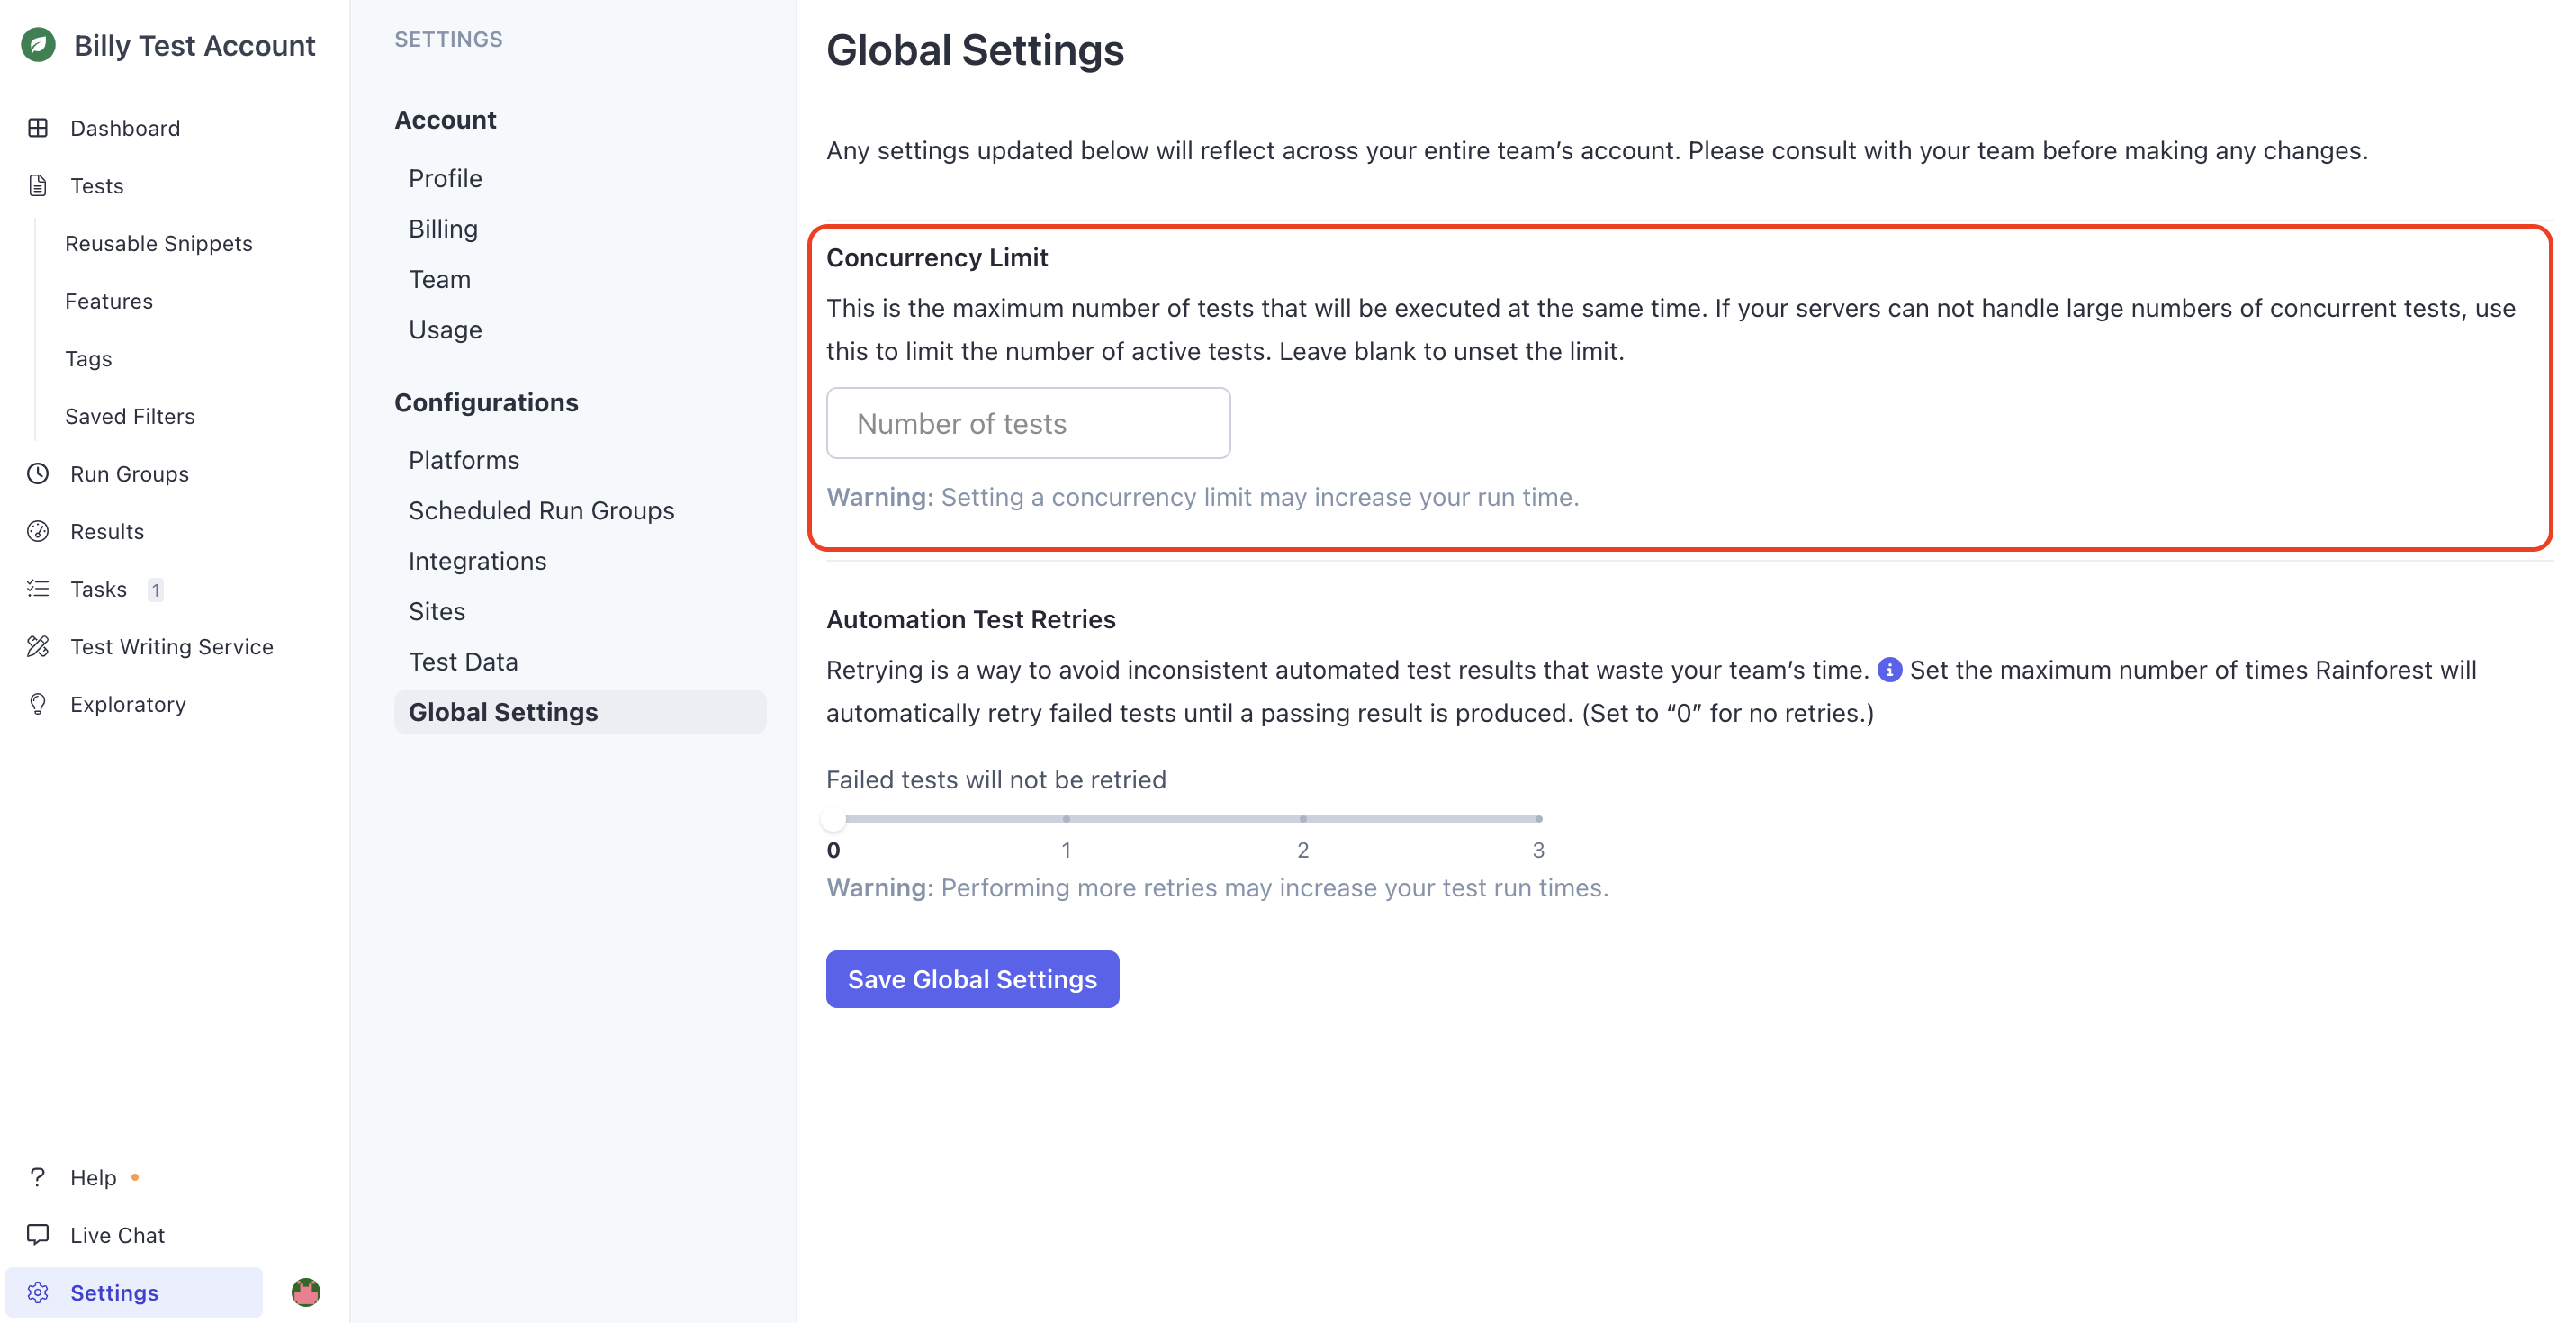 The Global Settings page.